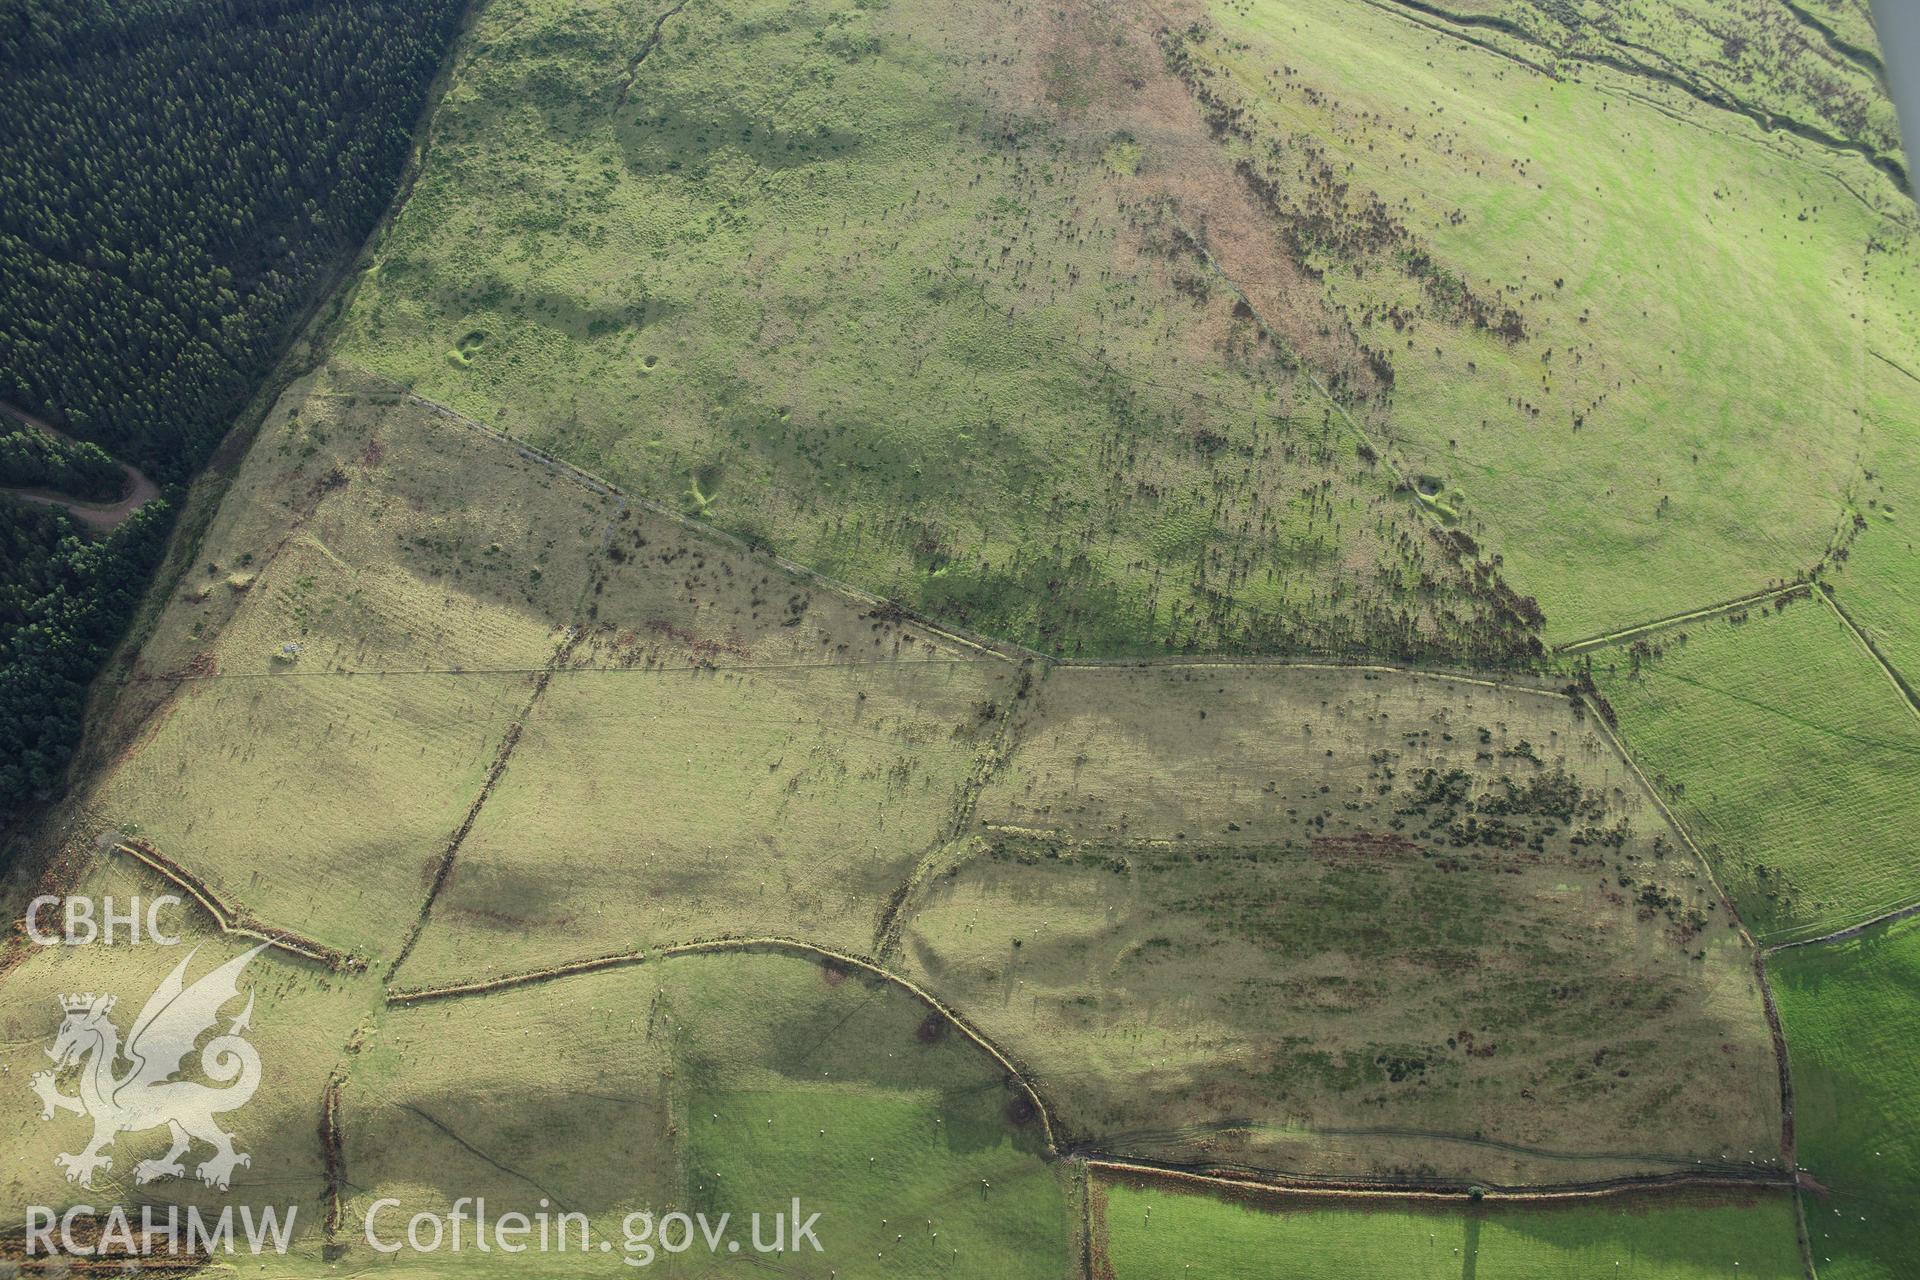 RCAHMW colour oblique photograph of Deserted rural settlement north of Foel Fynyddau. Taken by Toby Driver on 28/11/2012.